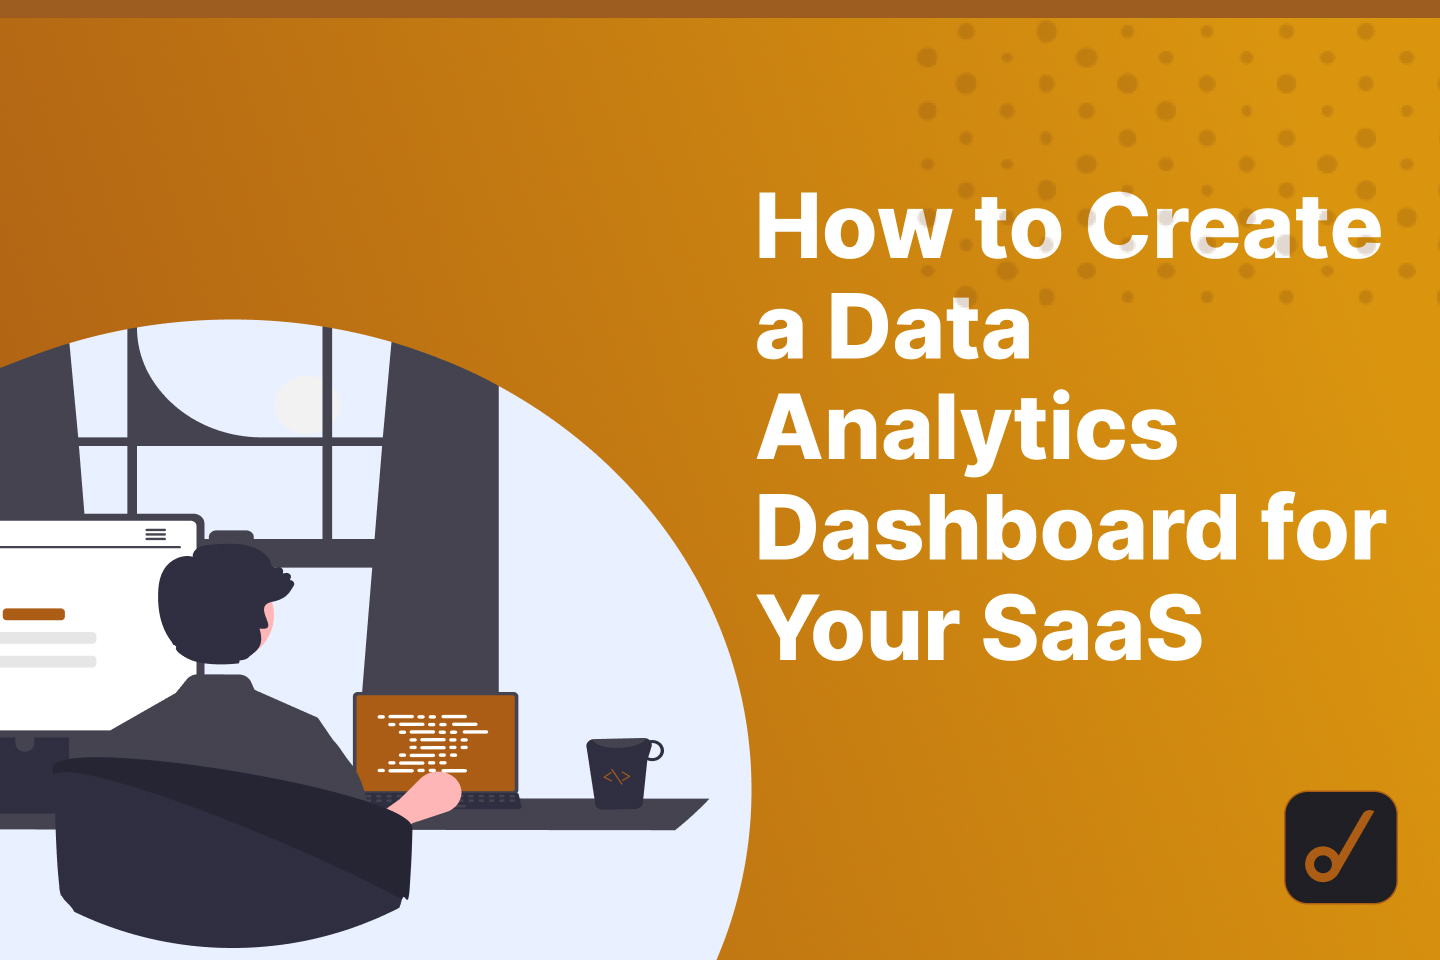 How to Build a Data Analytics Dashboard for Your SaaS Company